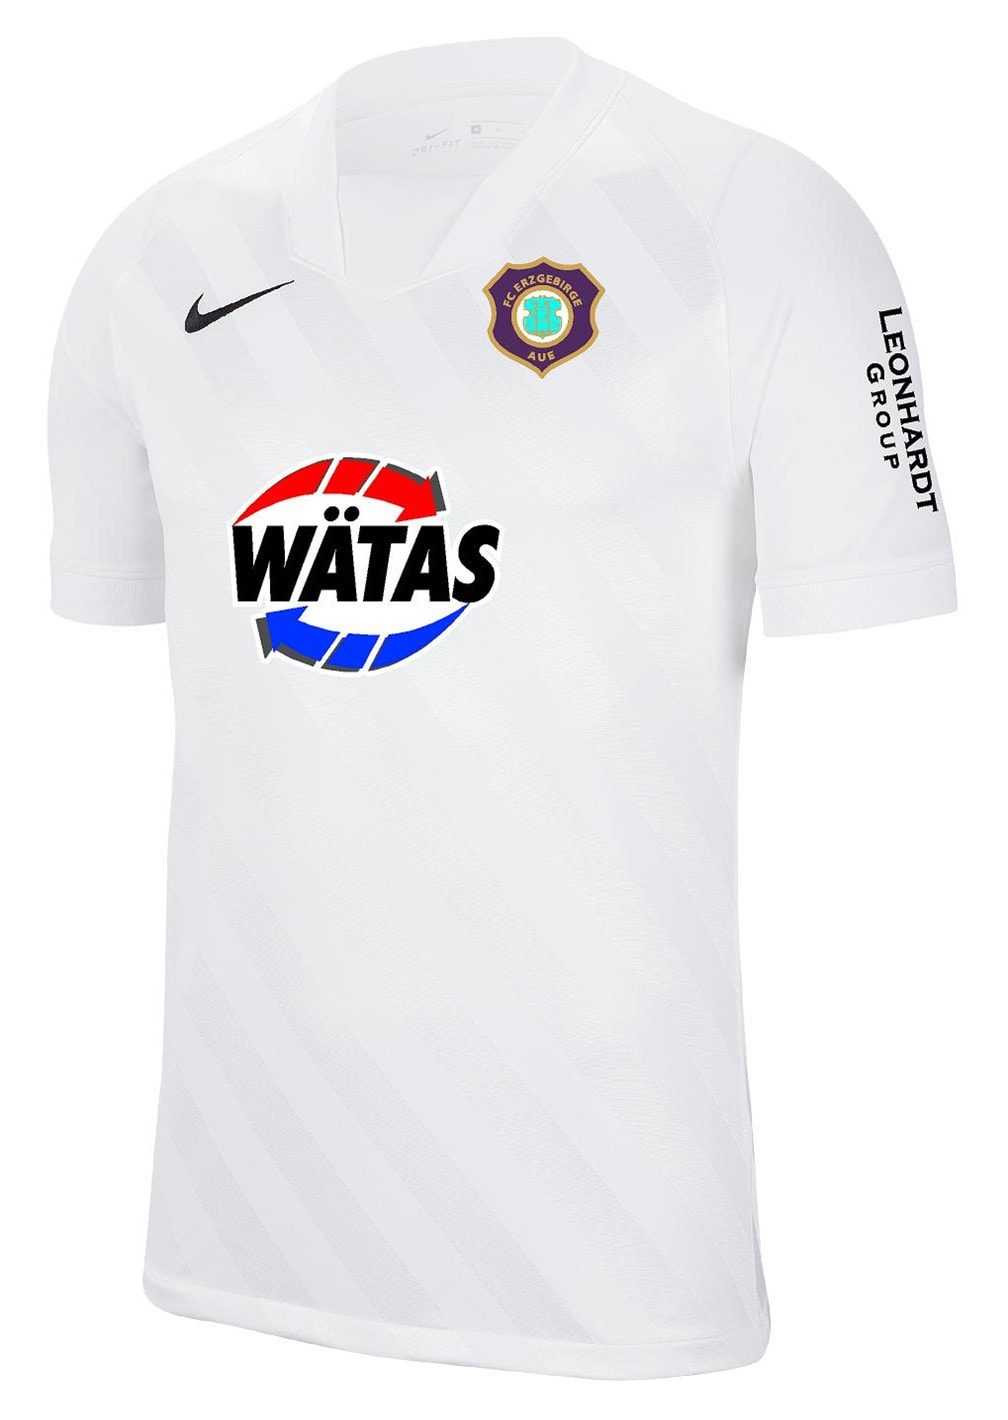 Erzgebirge Aue Away 2020/2021 Football Shirt Manufactured By Nike. The Club Plays Football In Germany.